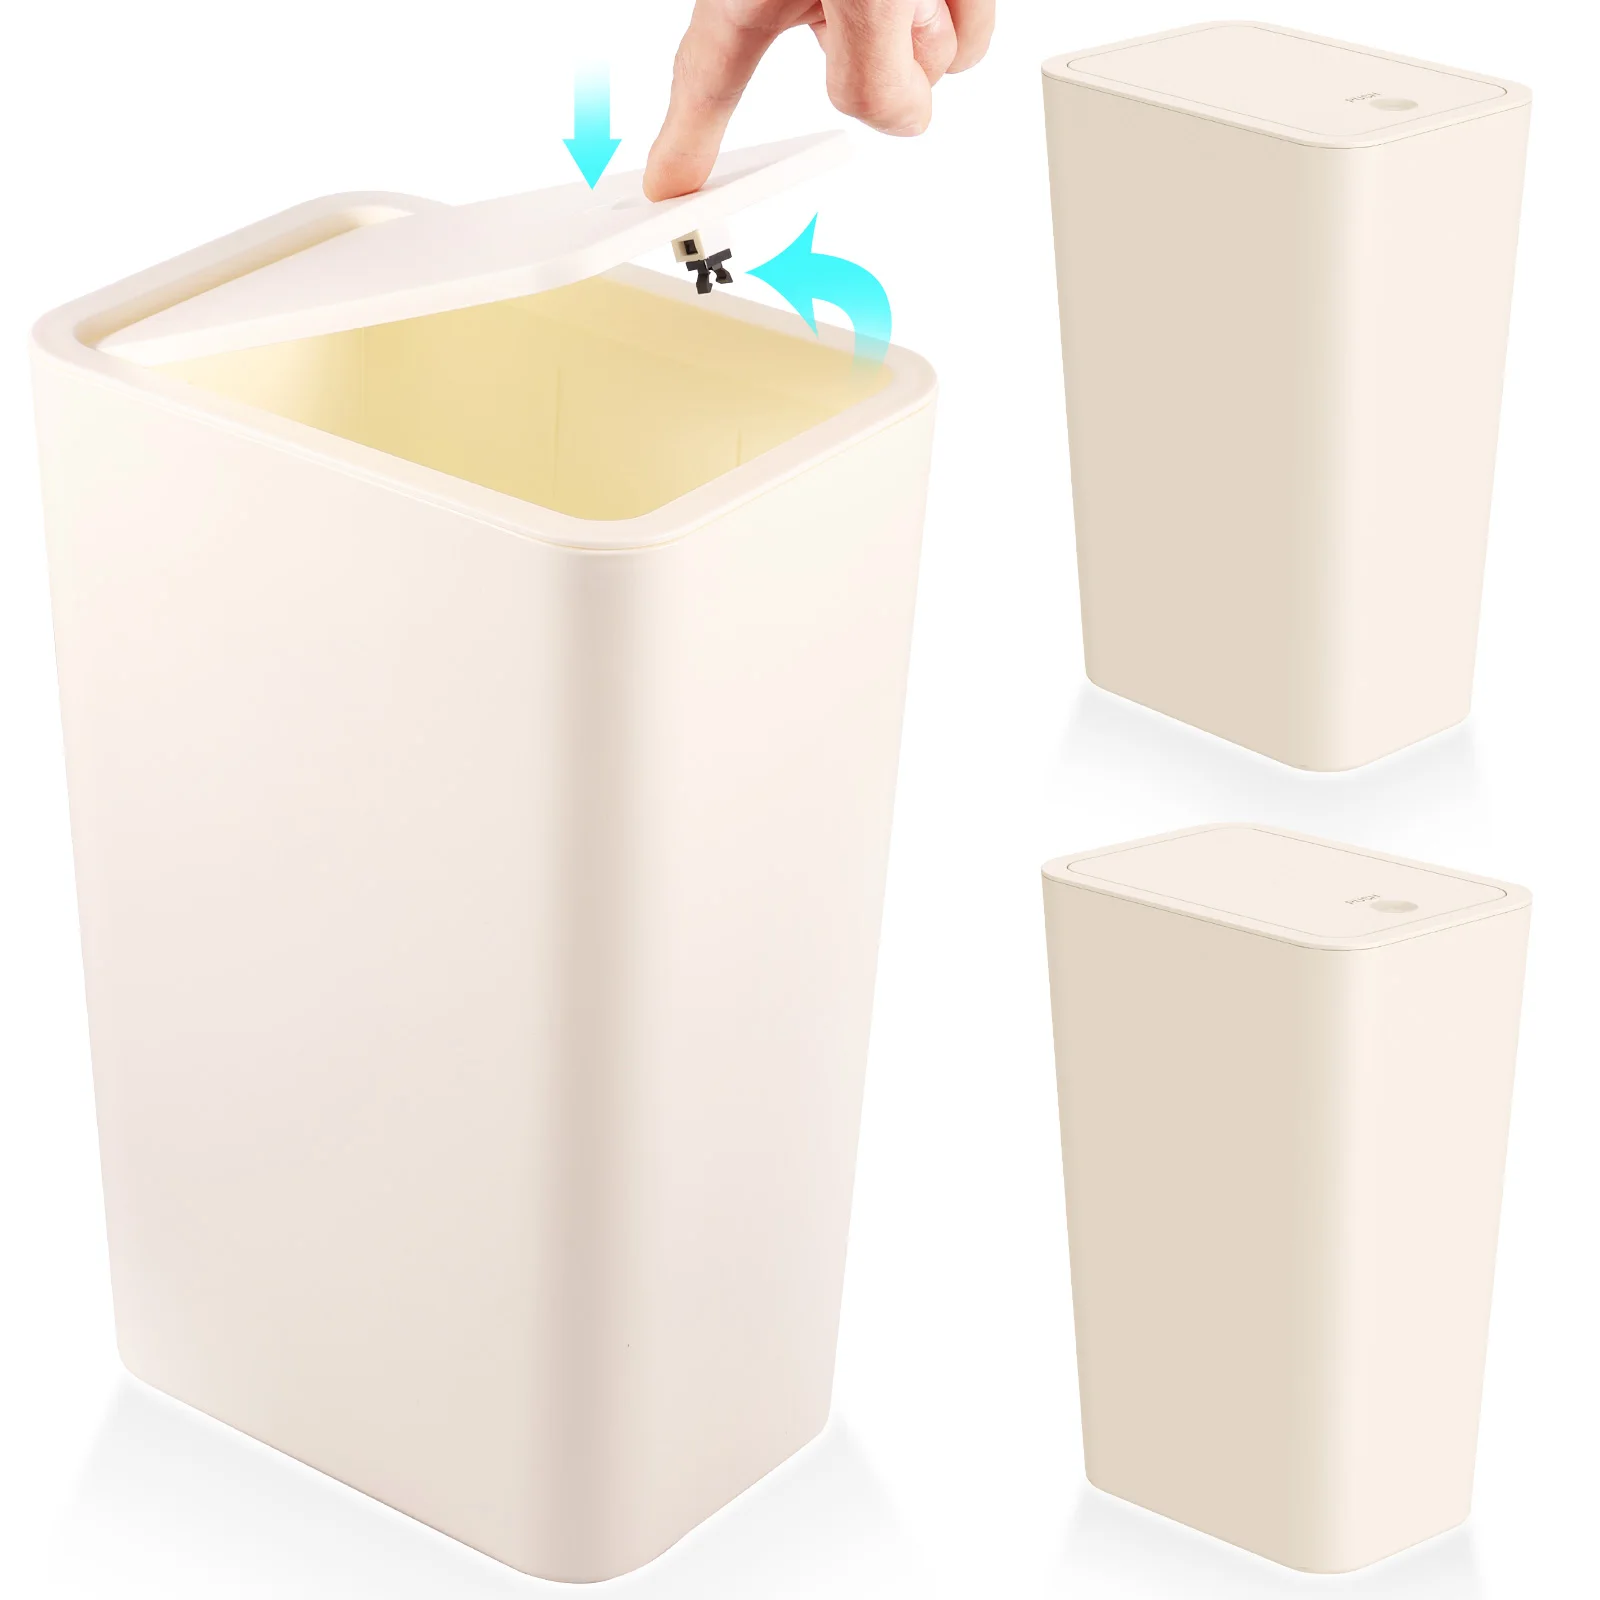 

3Pcs Bathroom Trash Can Space Saving Garbage Can with Lid 2.6 Gallons Dogproof Waste Bin Rectangular Modern Waste Can Reusable